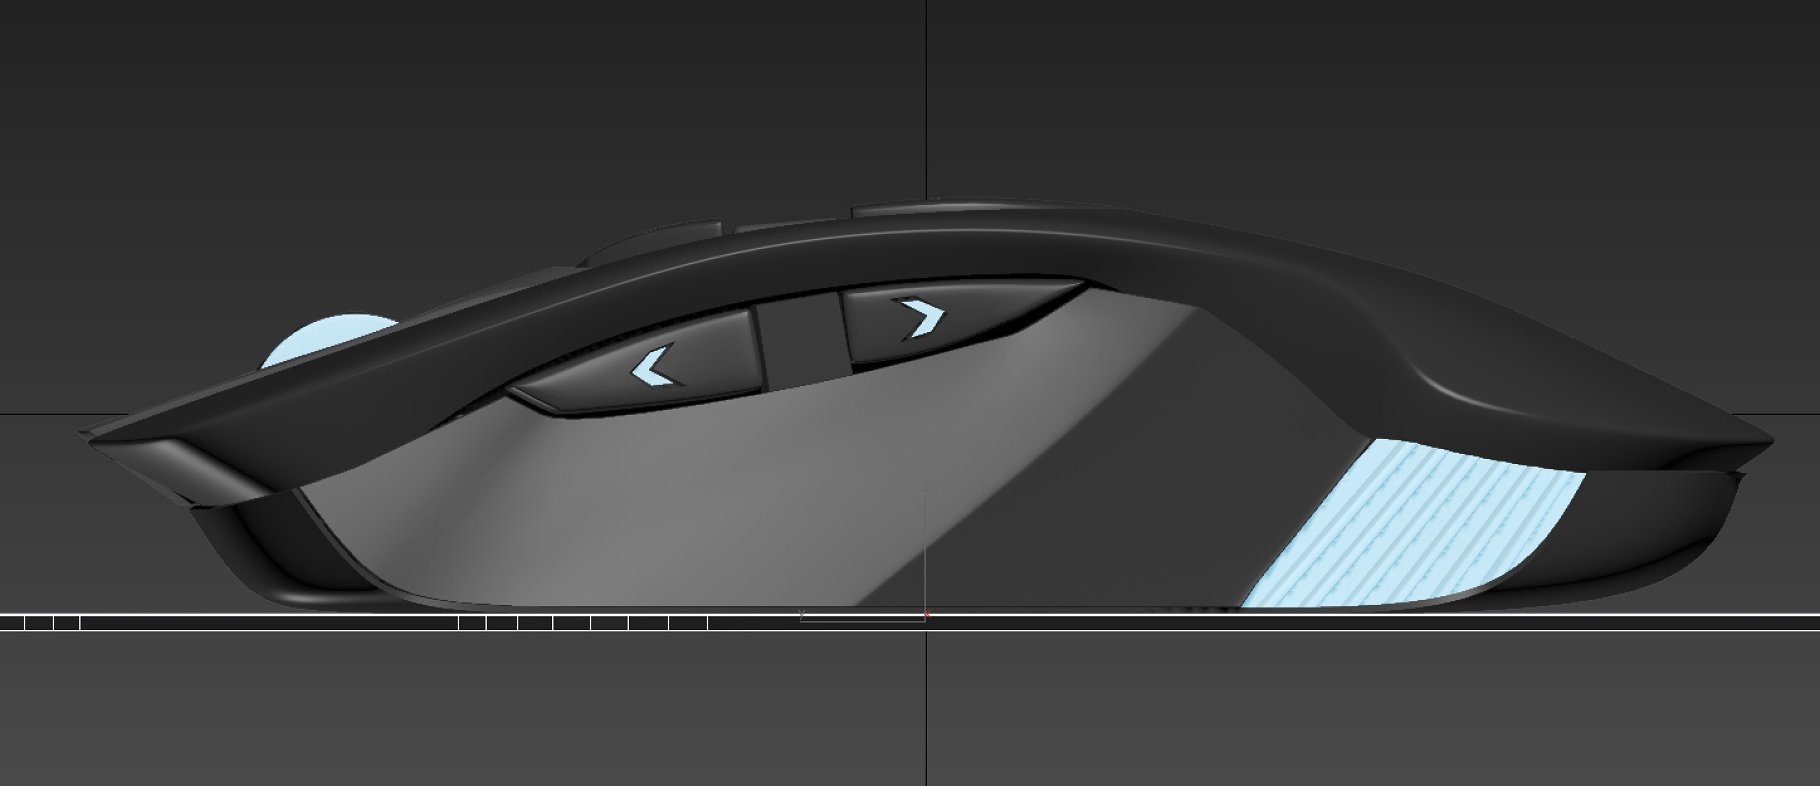 Rendering of an adorable 3d model of a gaming mouse